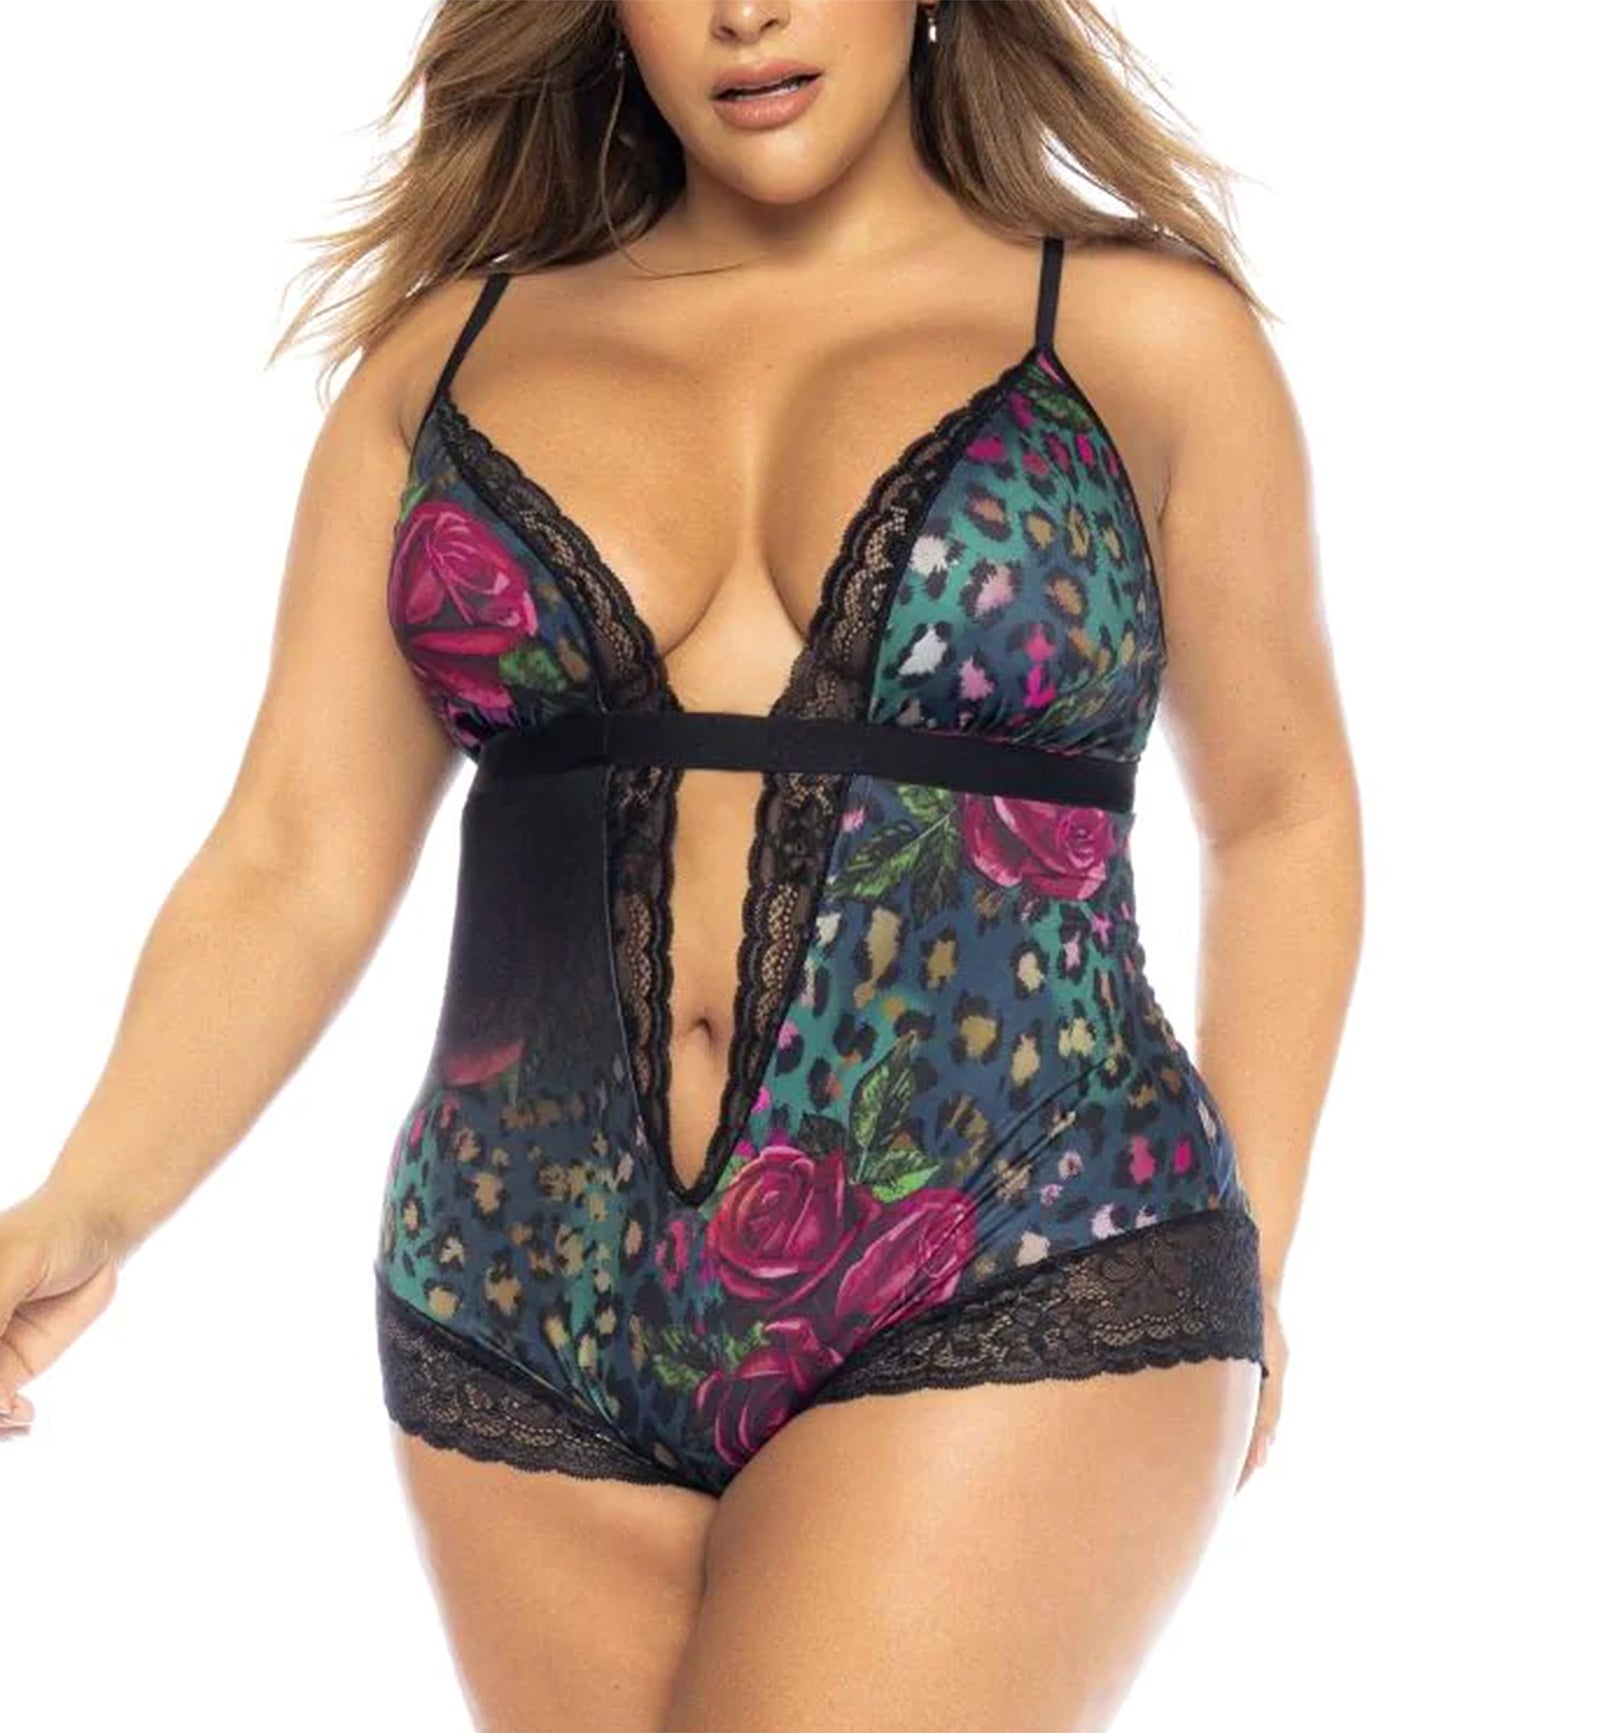 Mapale Plunge Floral and Lace Romper Teddy PLUS (7527X)3X/4X,Floral Print - Floral Print,3X/4X